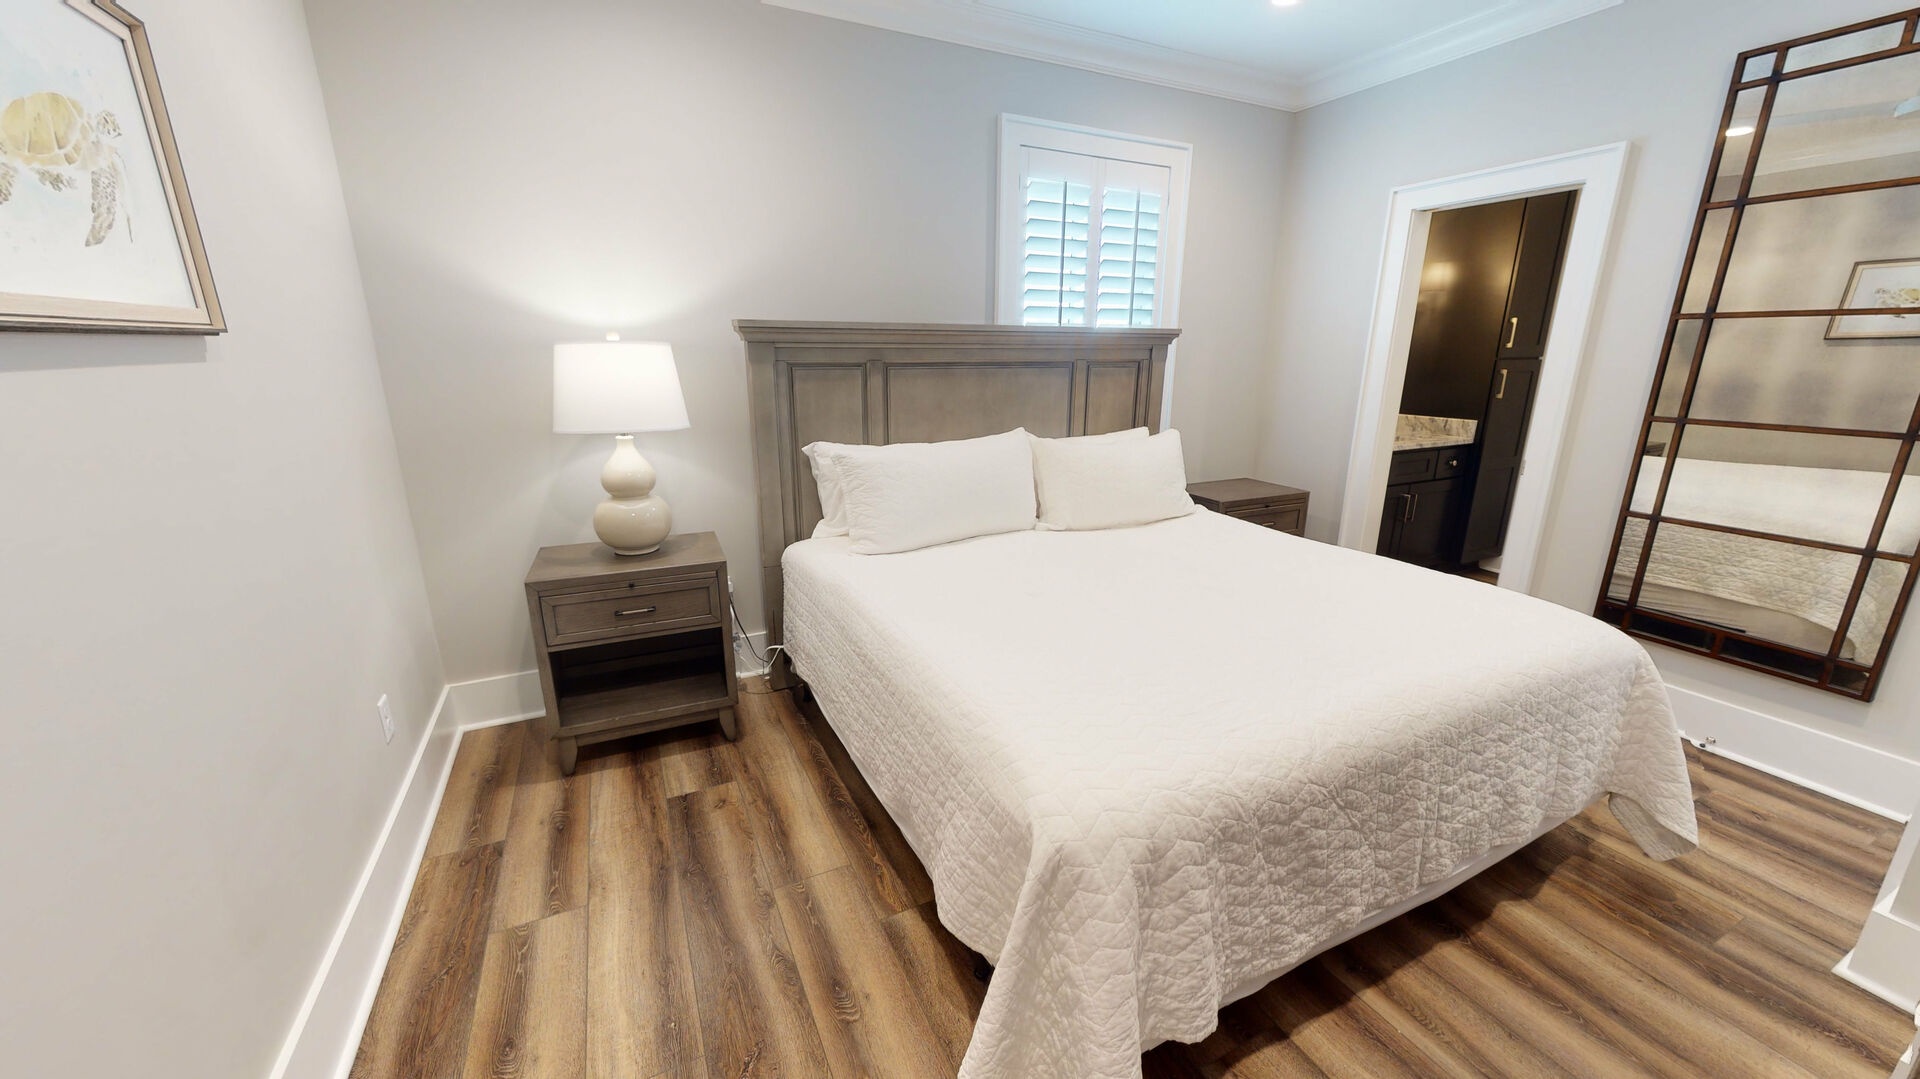 2nd floor Master bedroom with a king bed